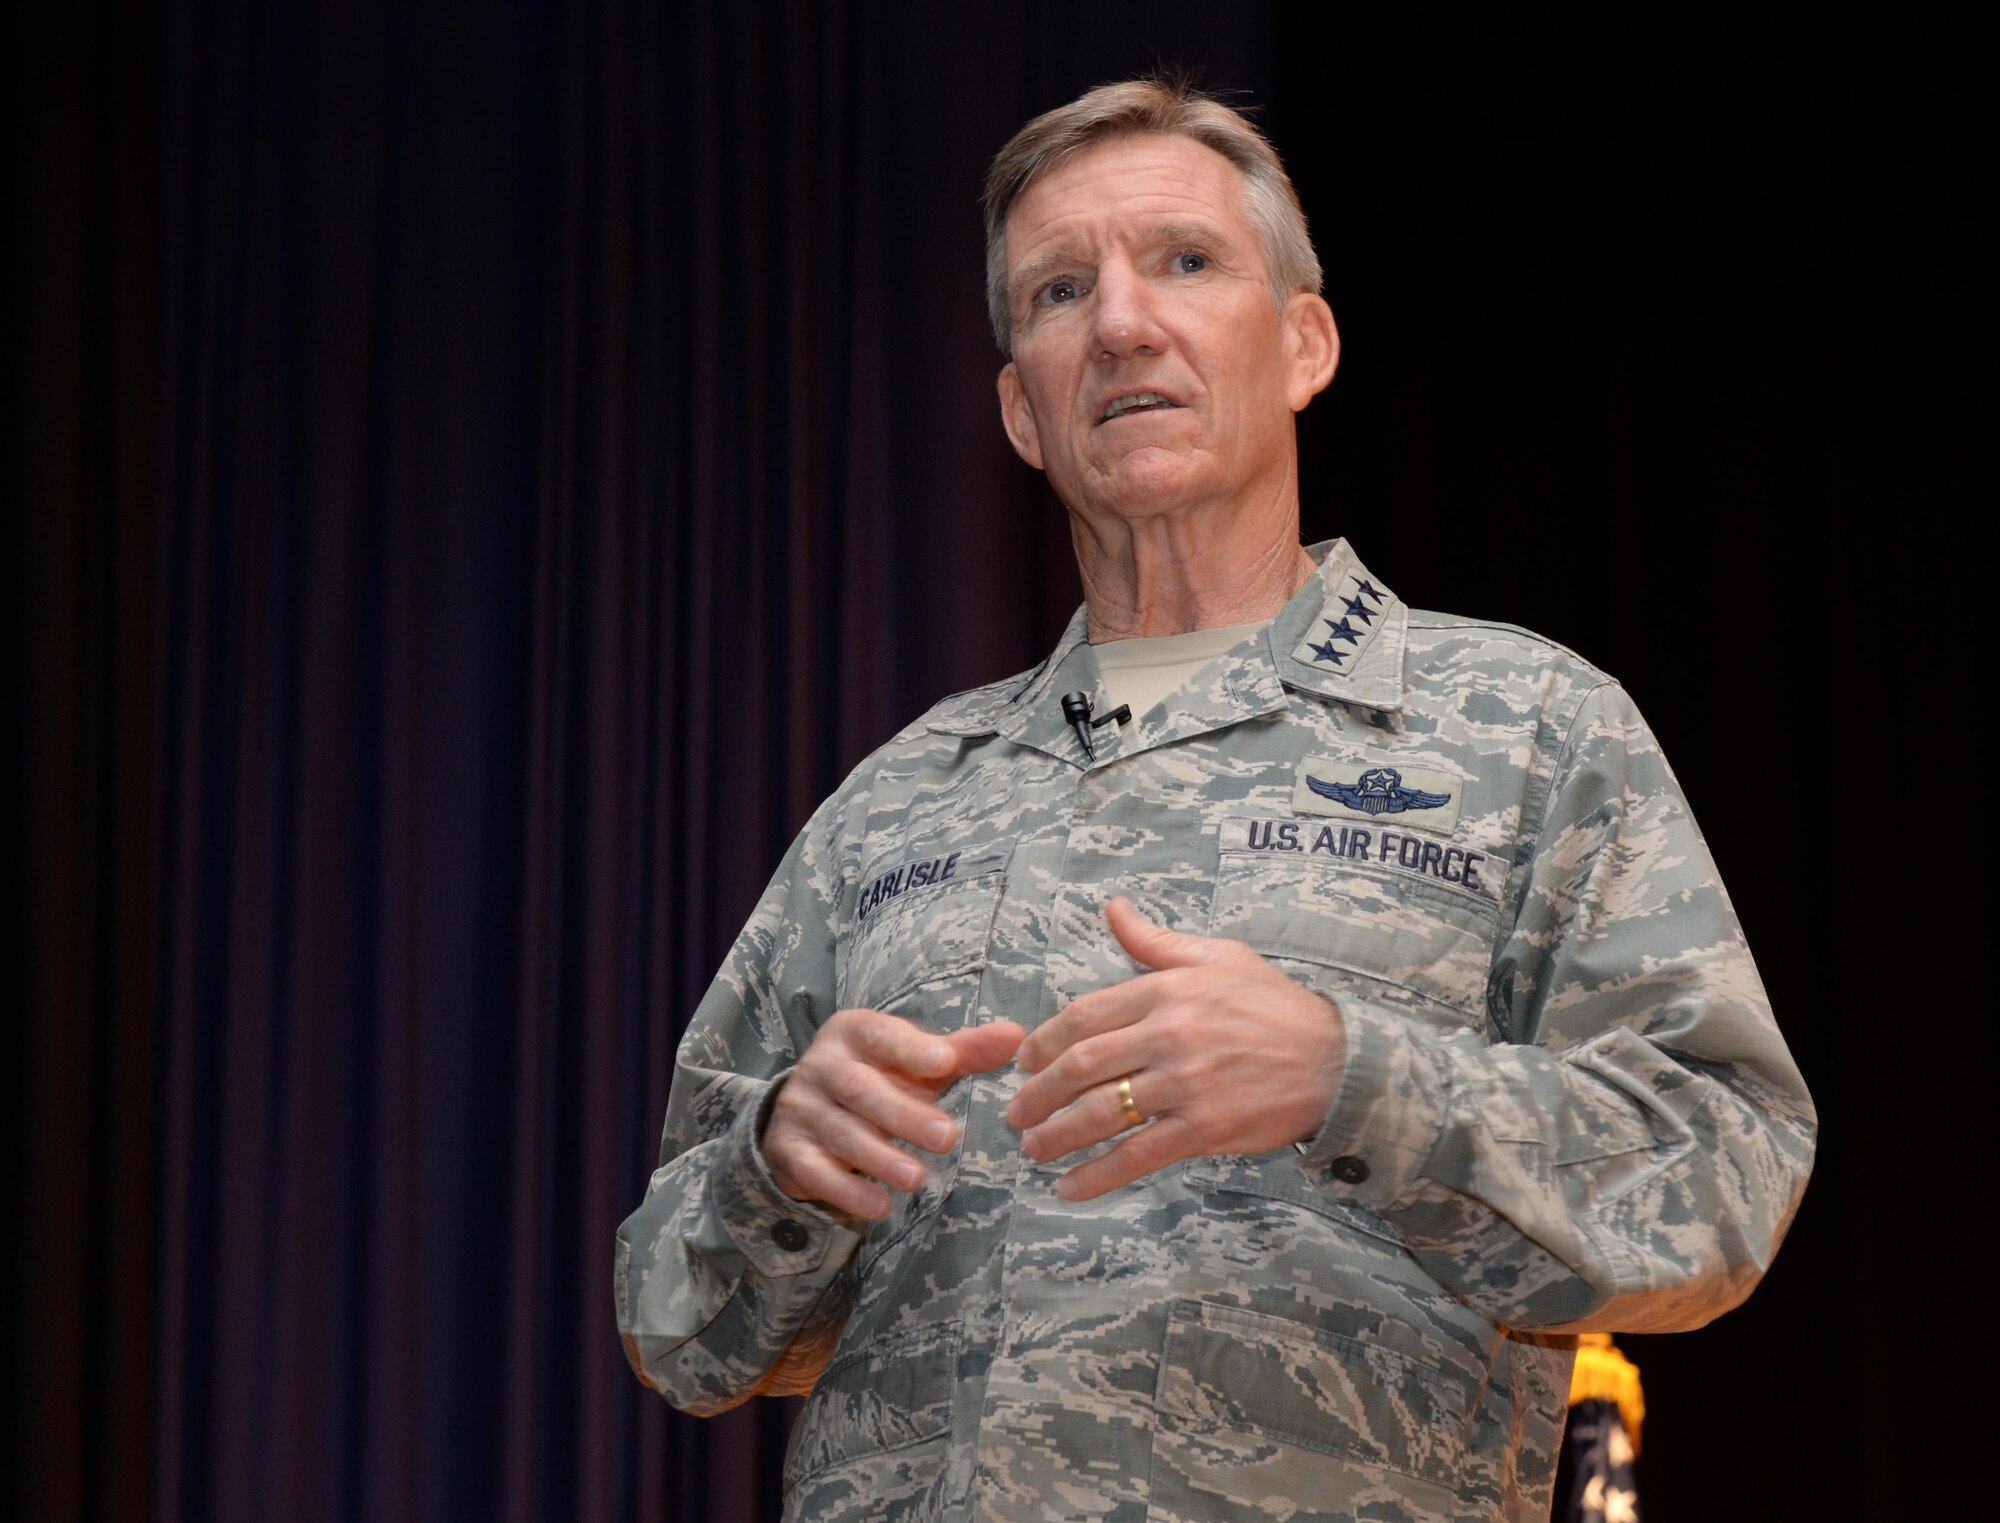 Gen. Hawk Carlisle, commander of Air Combat Command, speaks during an enlisted all-call at Joint Base Langley Eustis, June 28, 2016. Carlisle’s presentation to the enlisted Airmen stationed here included facts about Operation Desert Storm, updates on the status of the Air Force and a question and answer session. At the conclusion of the enlisted call, Carlisle was presented with an invitation to be inducted into the Order of the Sword to recognize his dedication to the enlisted force during his 38 years of service. The Order of the Sword is the highest honor Air Force enlisted Airmen can bestow upon a commissioned officer who has made significant contributions to the enlisted force. (U.S. Air Force photo by Tech. Sgt. Steve Stanley/Released)